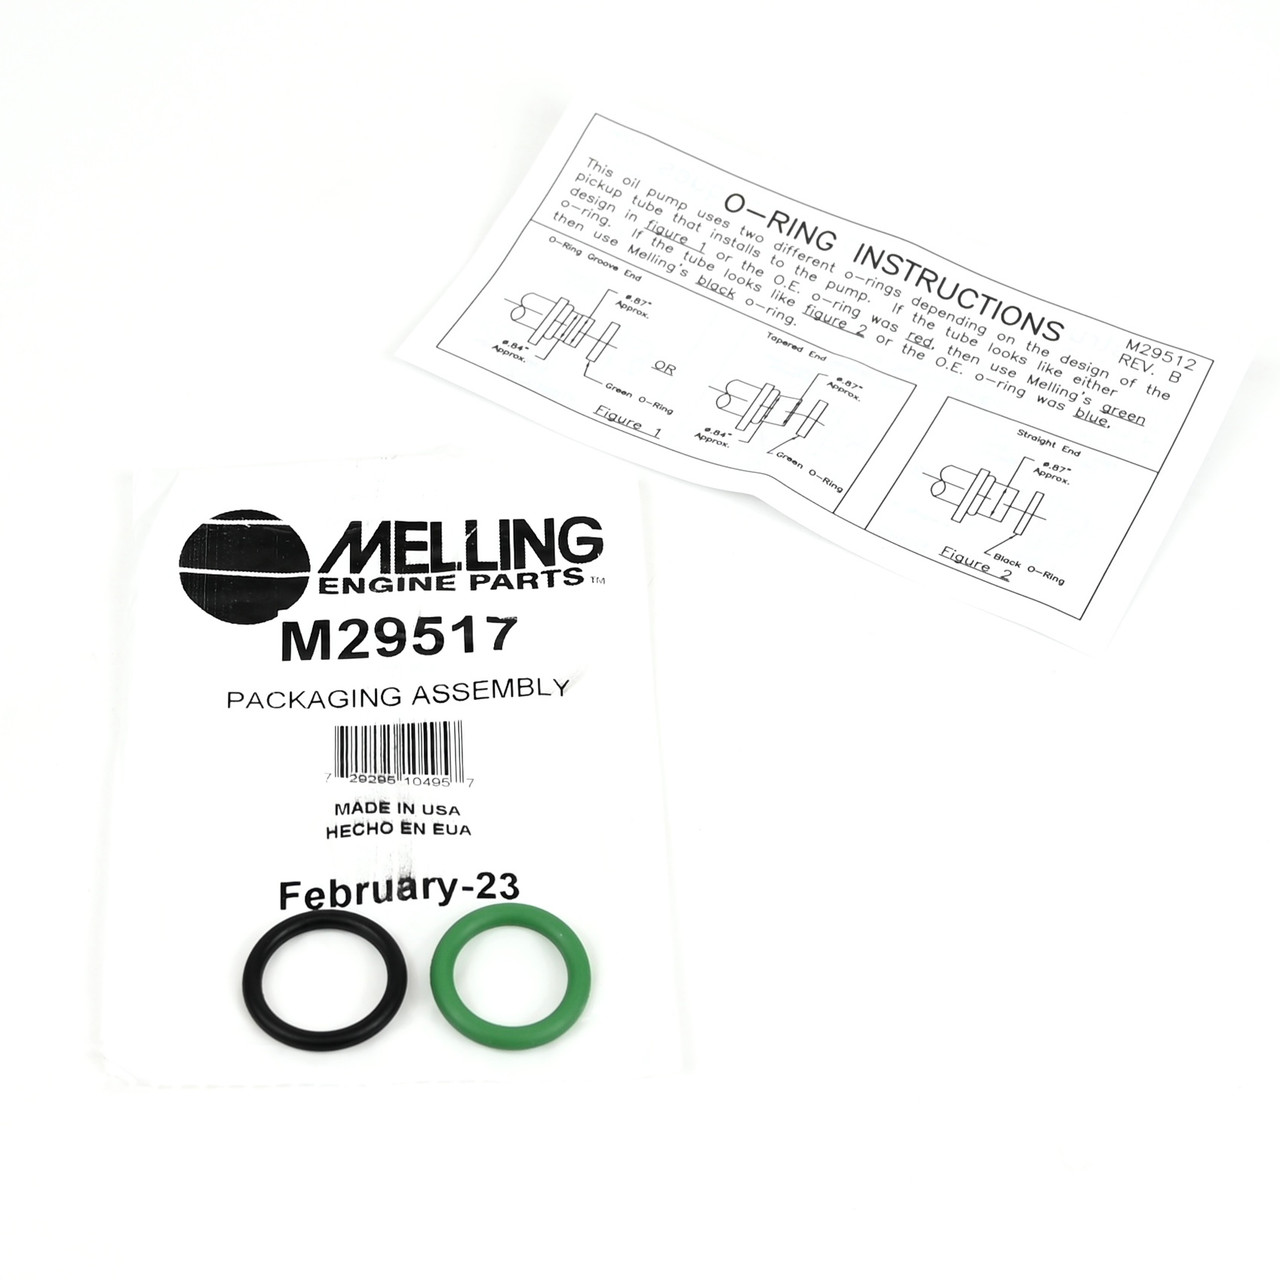 Melling M29517 Oil Pump Pickup O-ring Seals for LS Engines 4.8 5.3 5.7 6.0 6.2 LS1